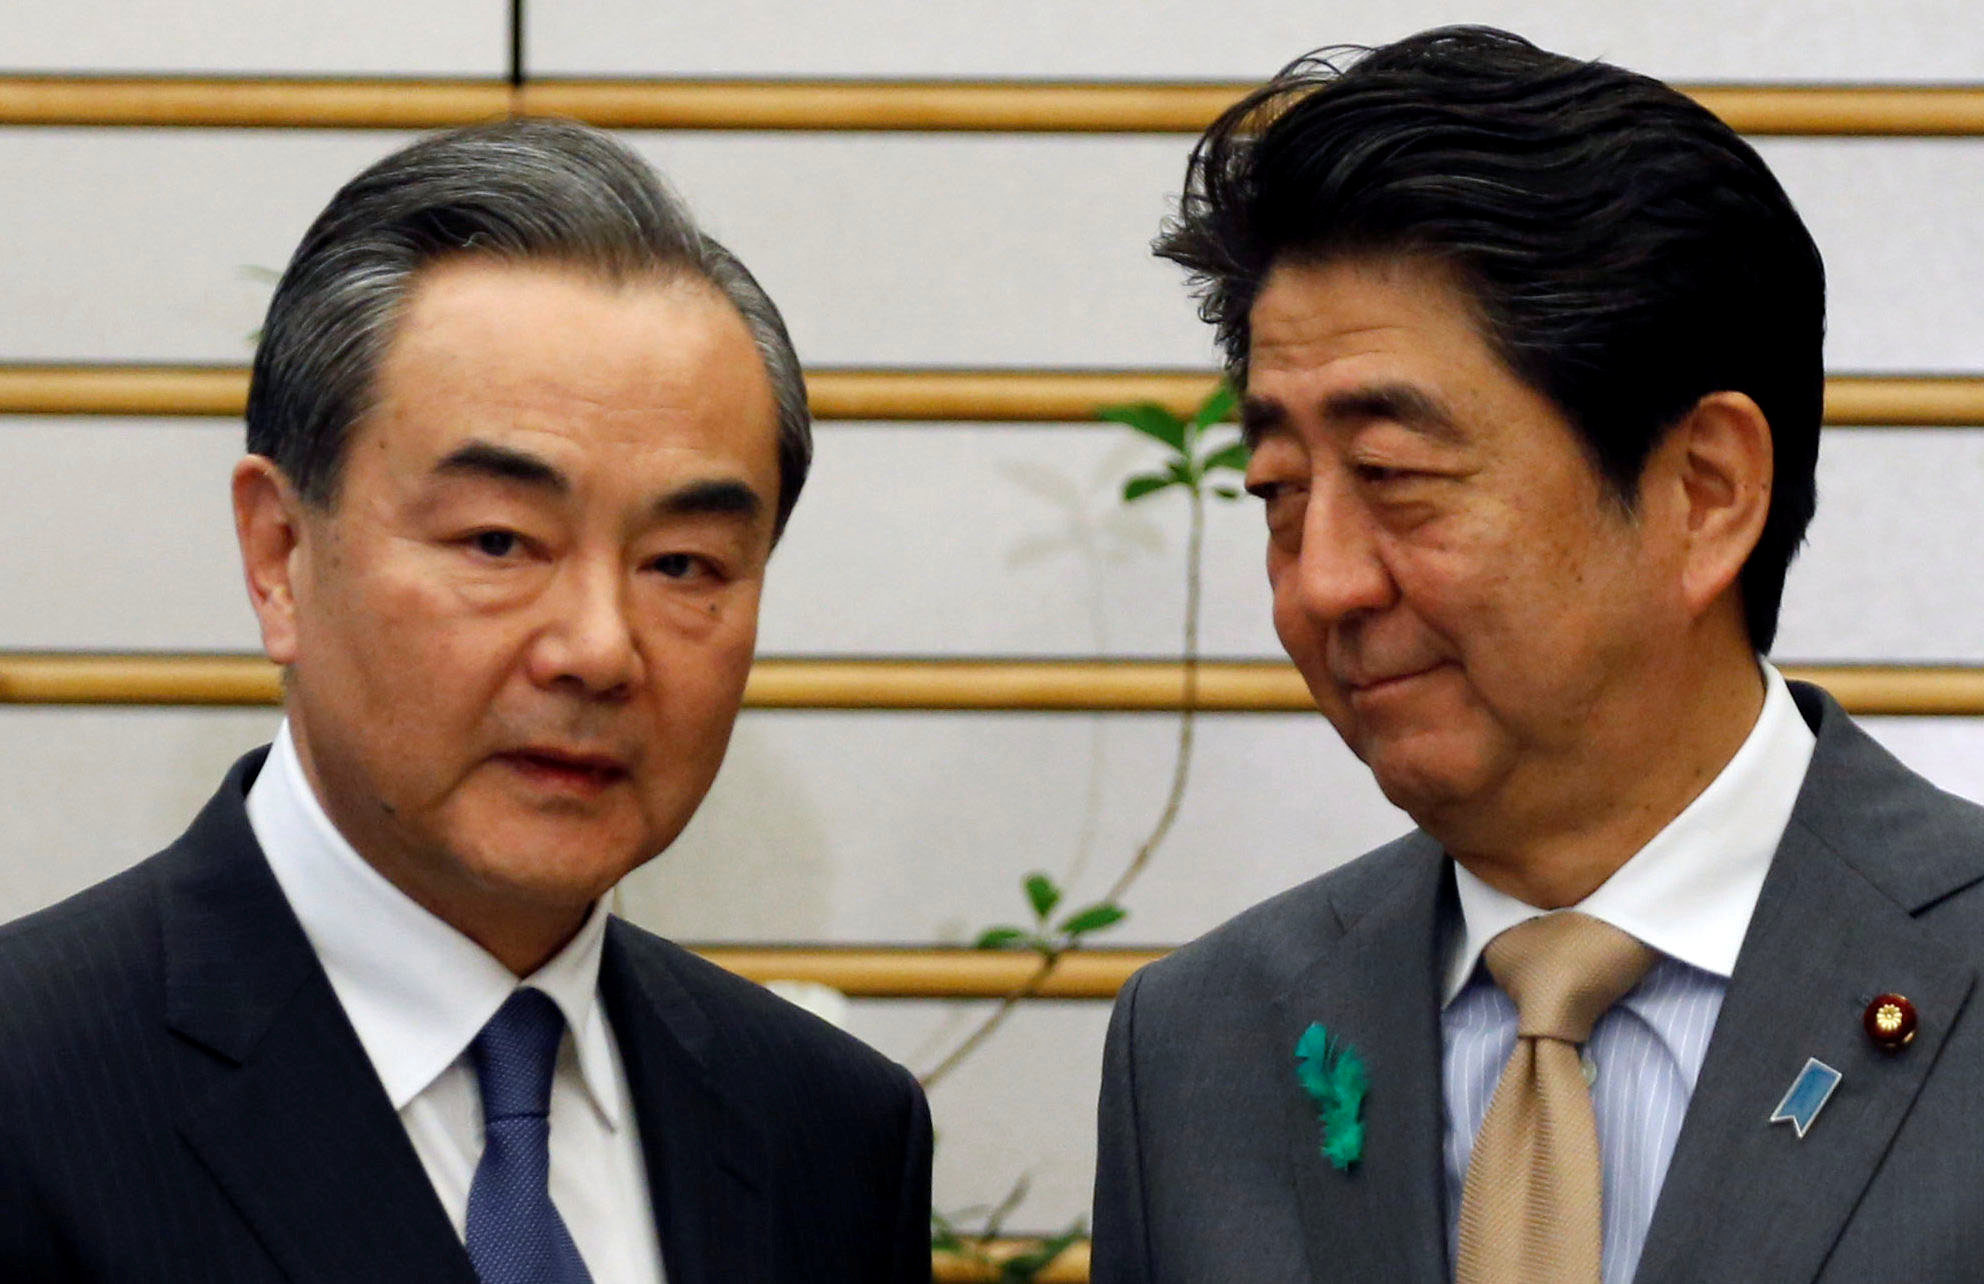 China's top diplomat, Wang Yi, meets with Prime Minister Shinzo Abe during high-level bilateral economic talks in Tokyo on Monday. | REUTERS